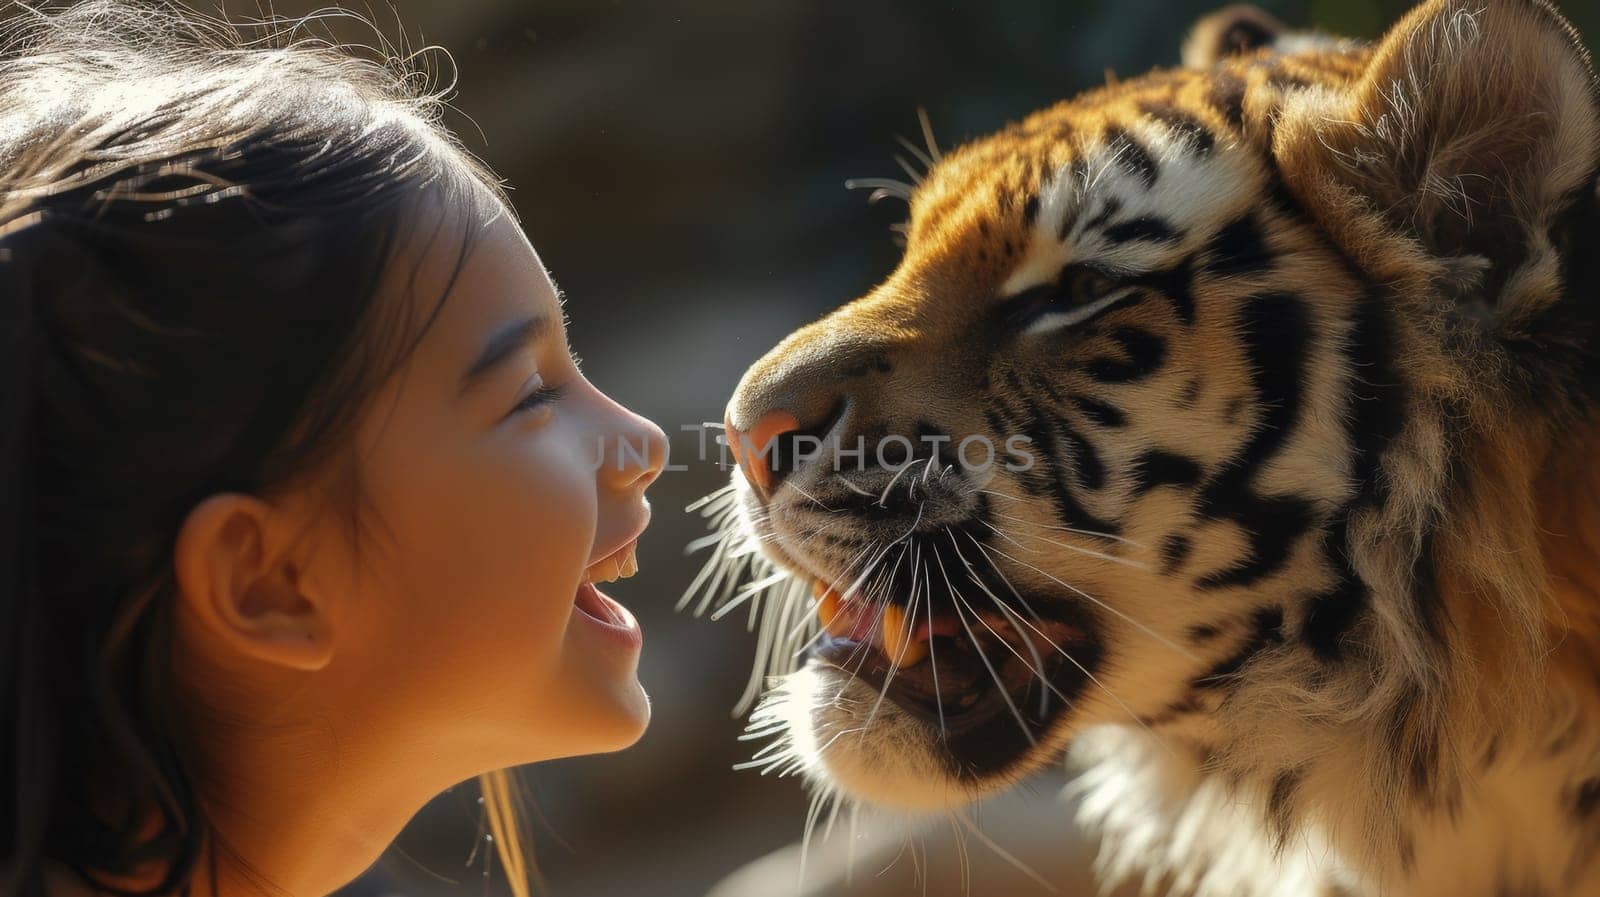 A young girl smiling at a tiger that is close to her